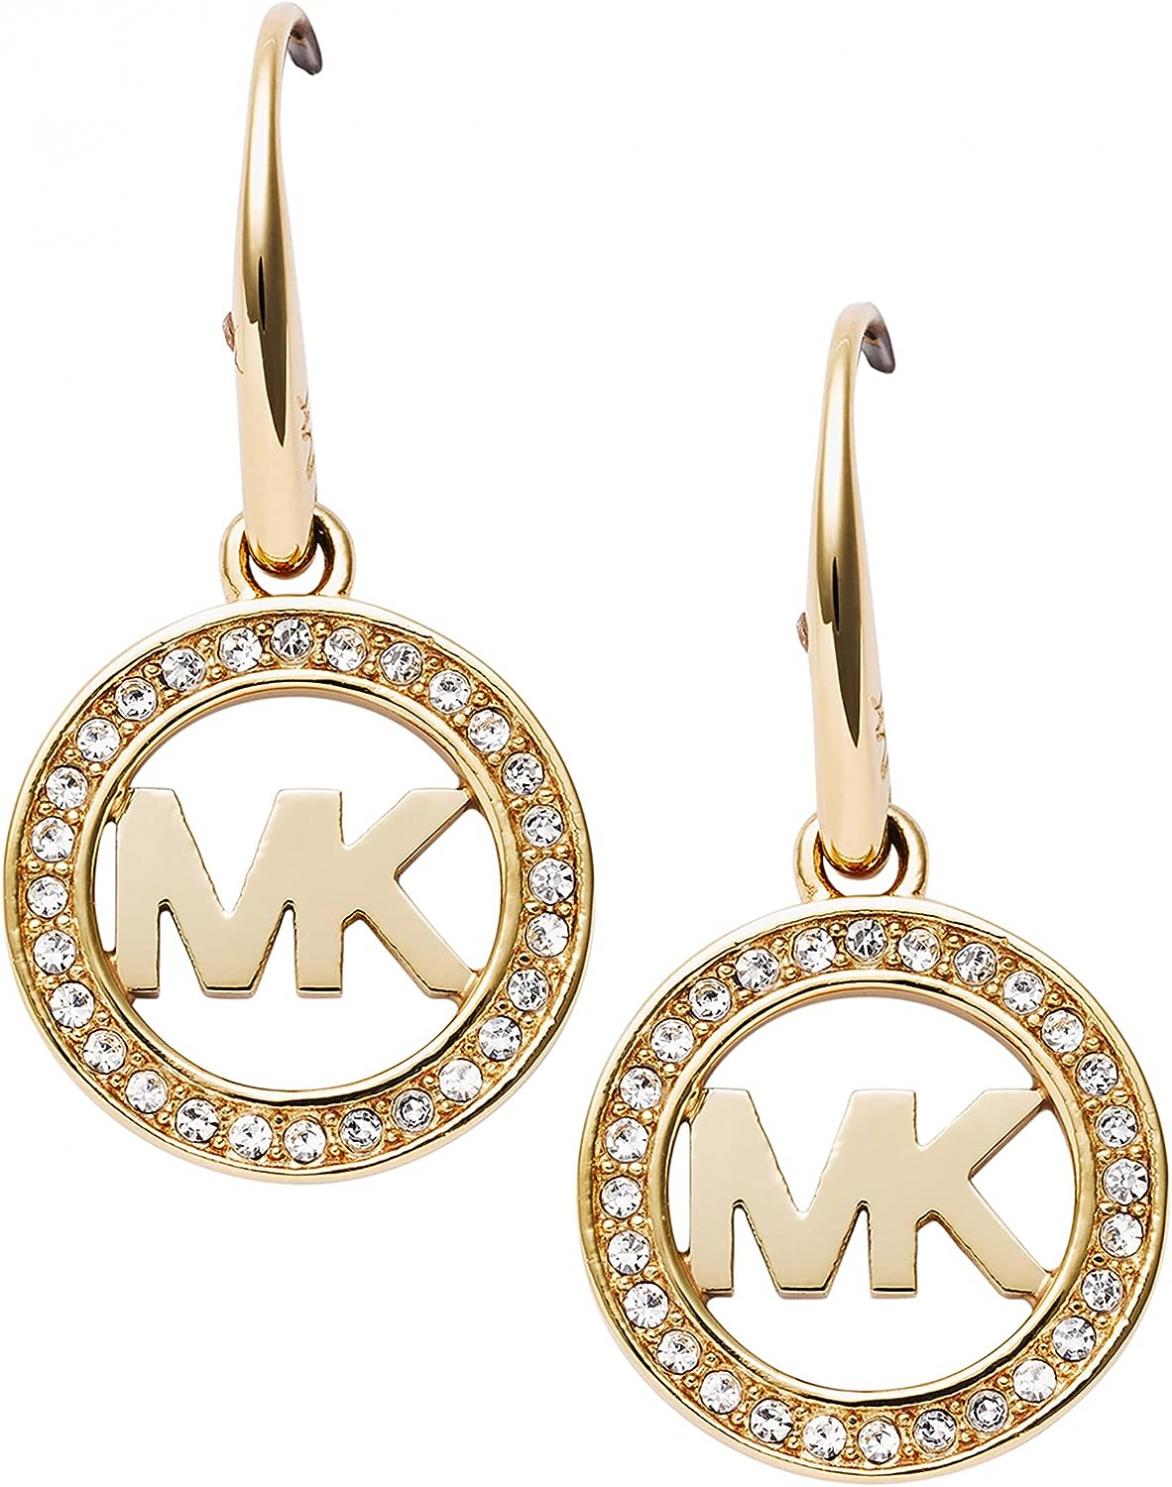 Michael Kors Women's Stainless Steel Drop Earrings With Crystal Accents